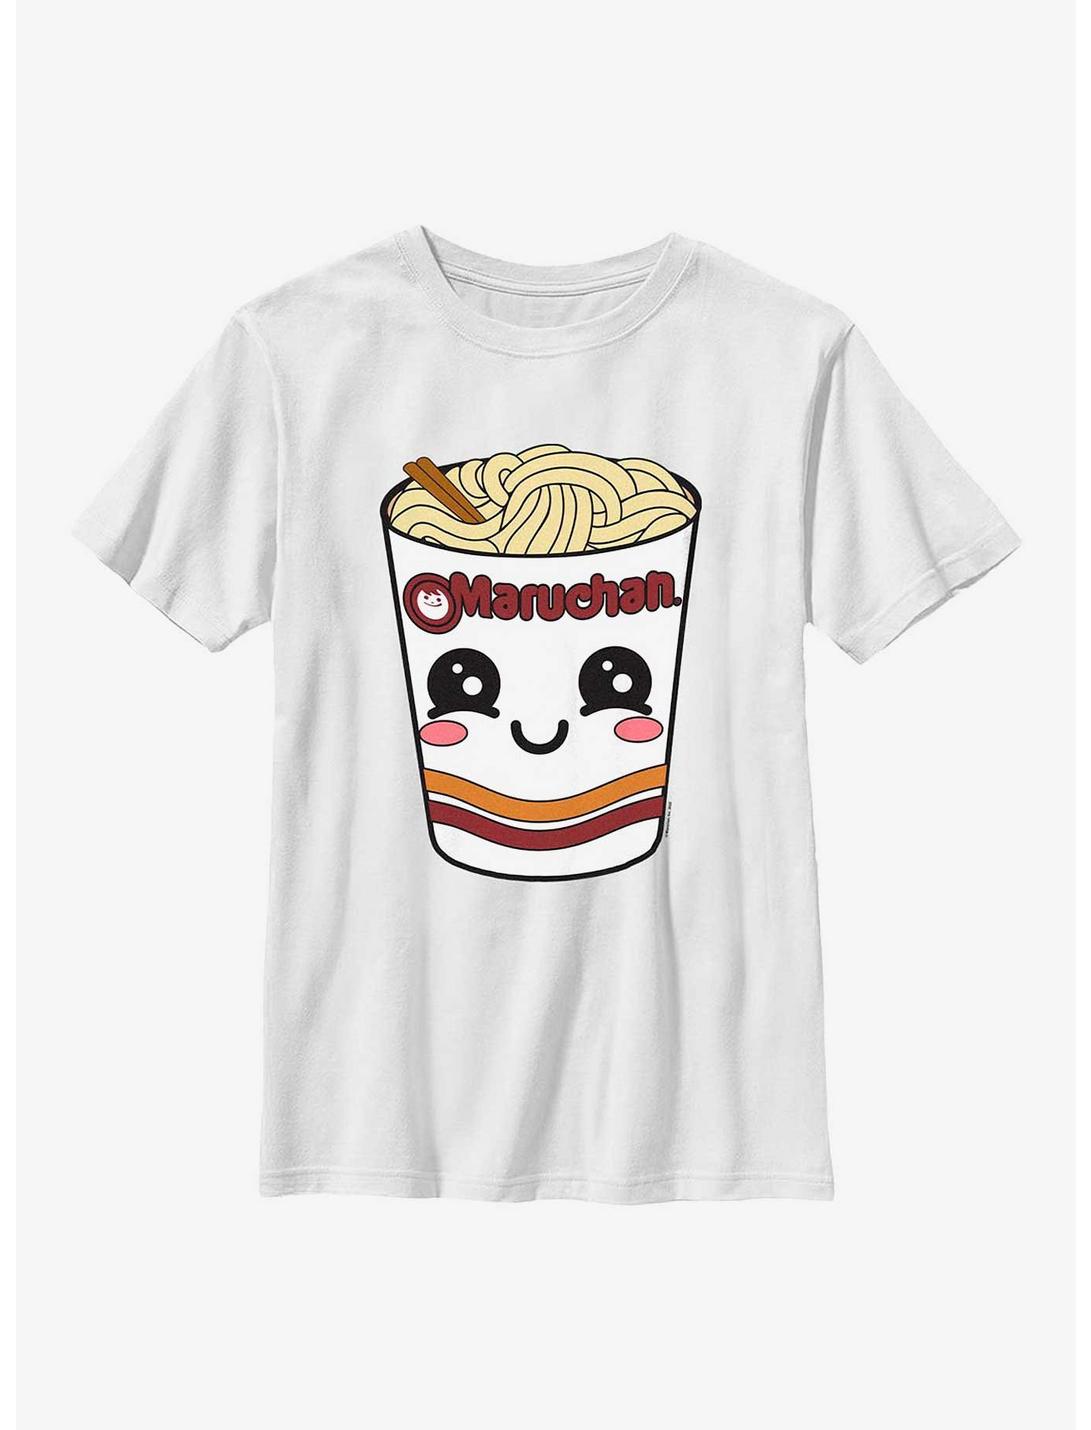 Maruchan Face Cup-8 Youth T-Shirt, WHITE, hi-res